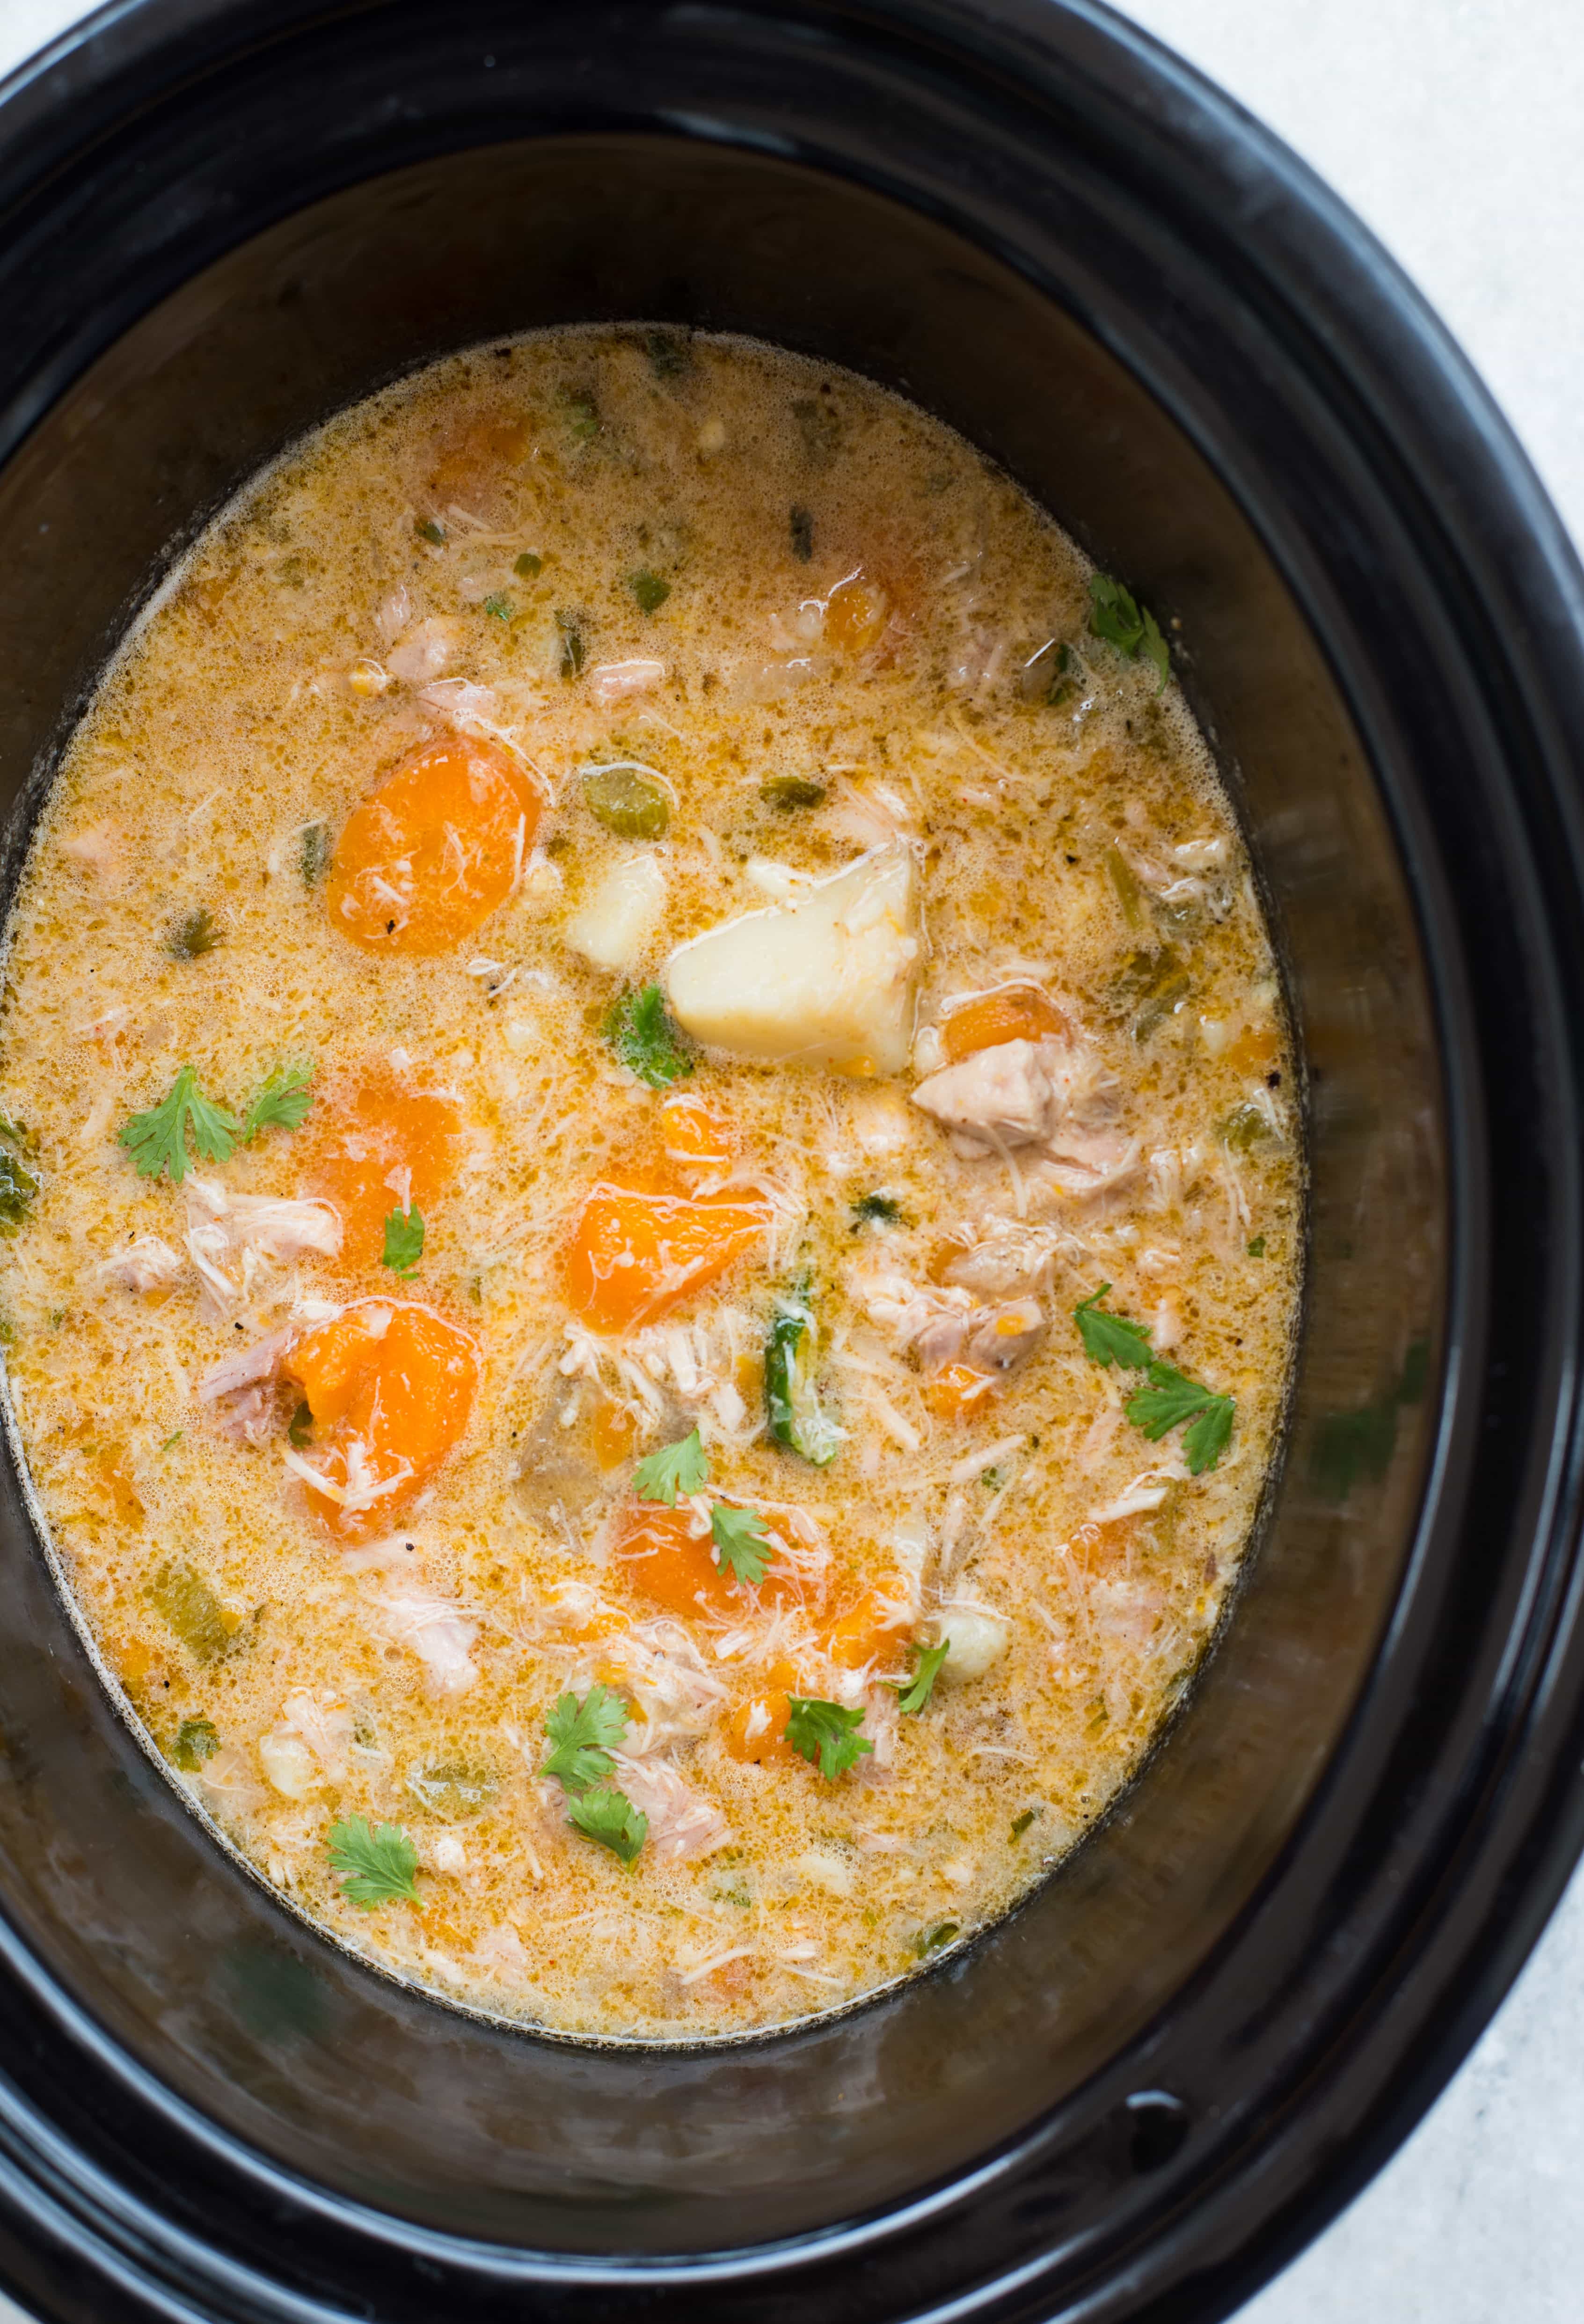 SLOW COOKER CHICKEN STEW - The flavours of kitchen